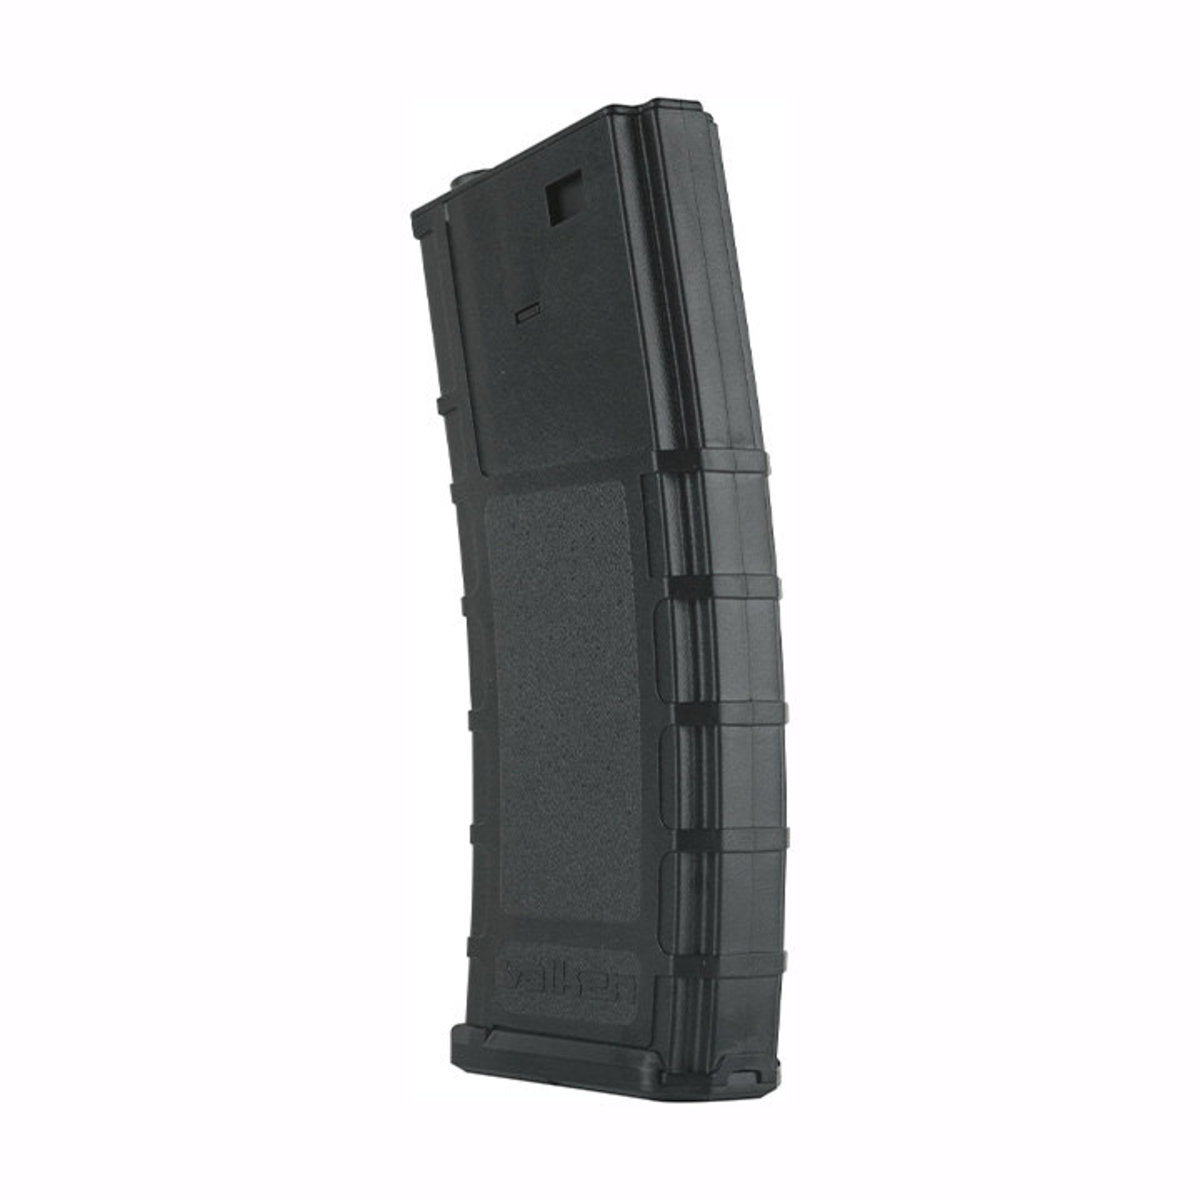 Valken 300Rd Thermold Rmag Hi-Cap Airsoft Magazines - 5 Pack